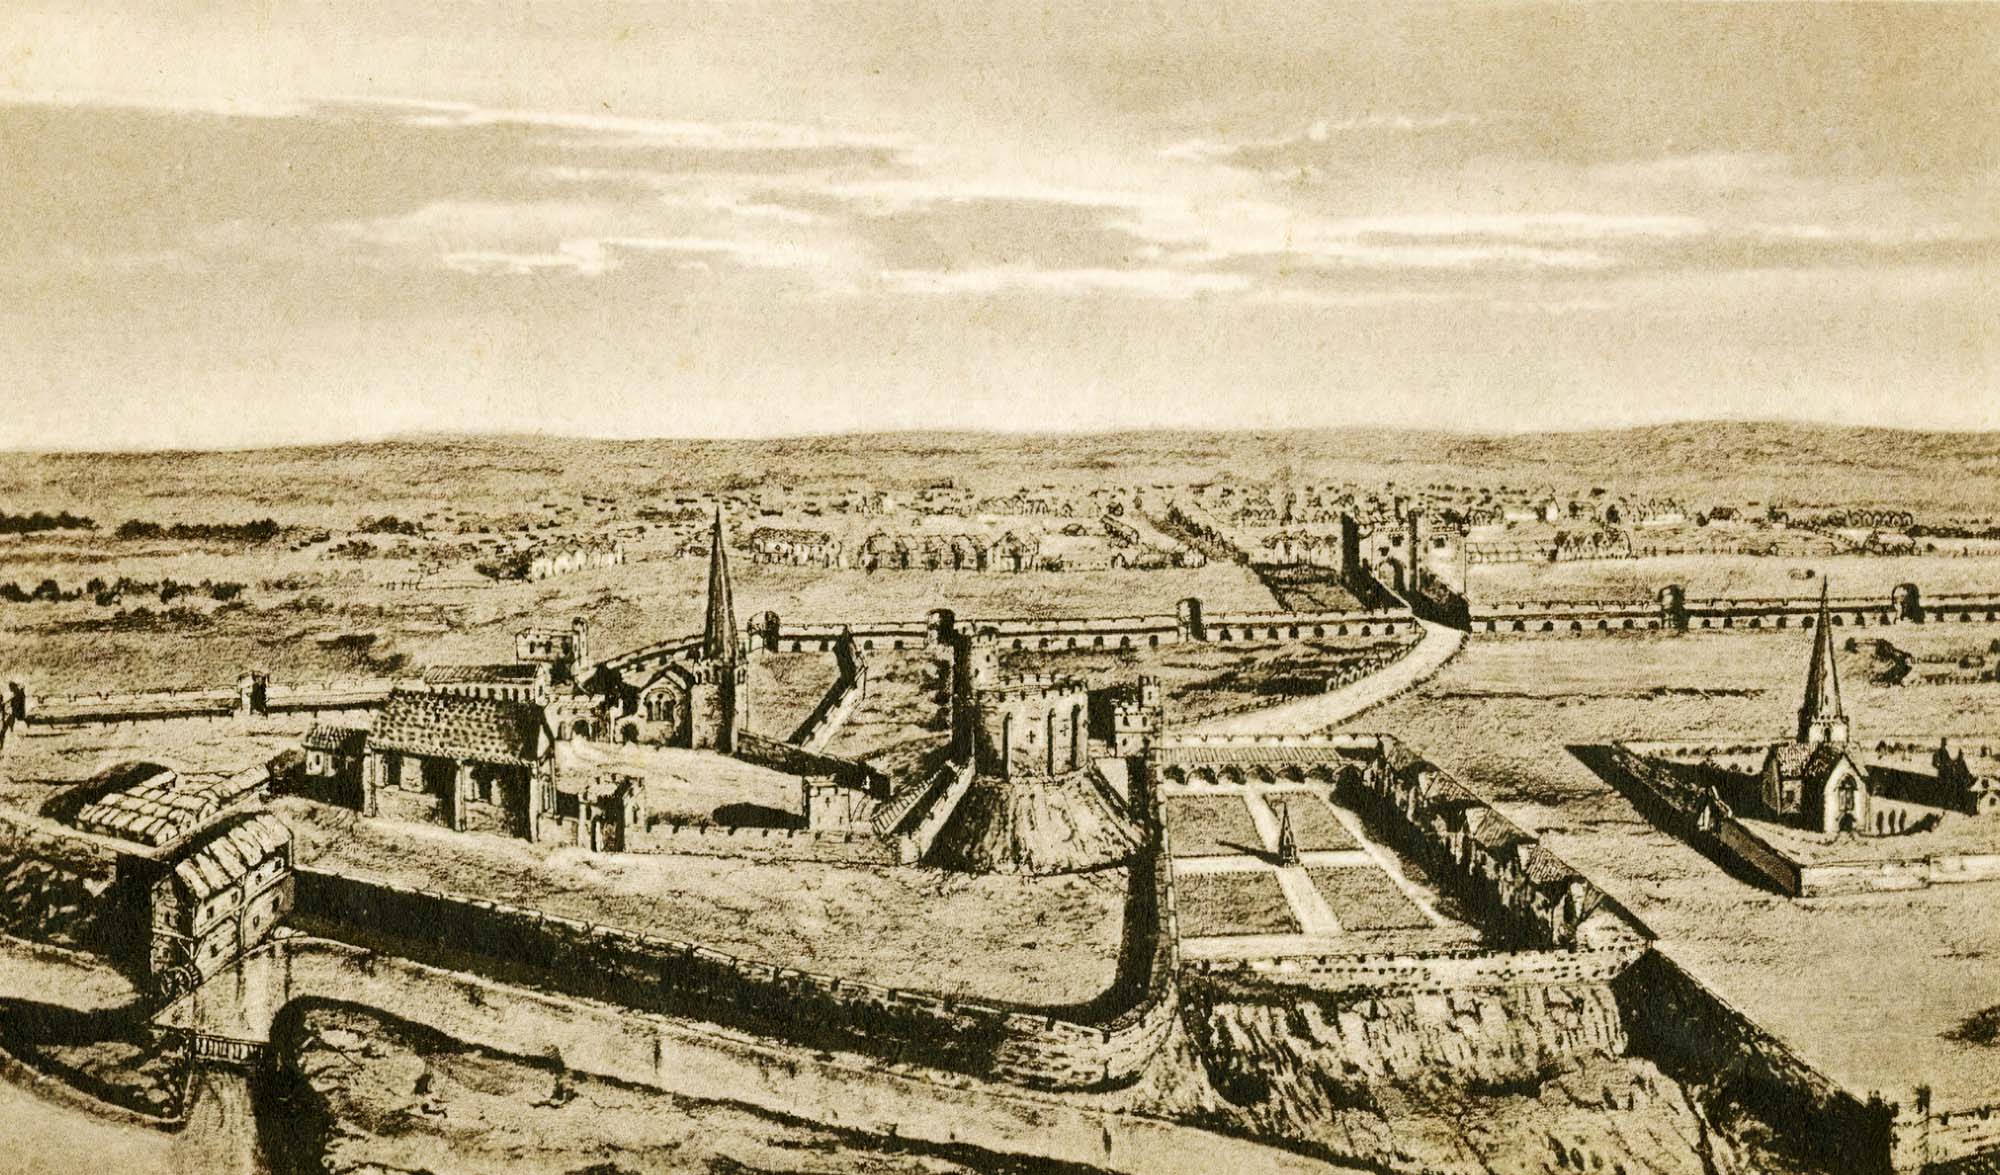 Leicester Castle in the 14th Century - James Thompson, An Account of Leicester Castle, 1859